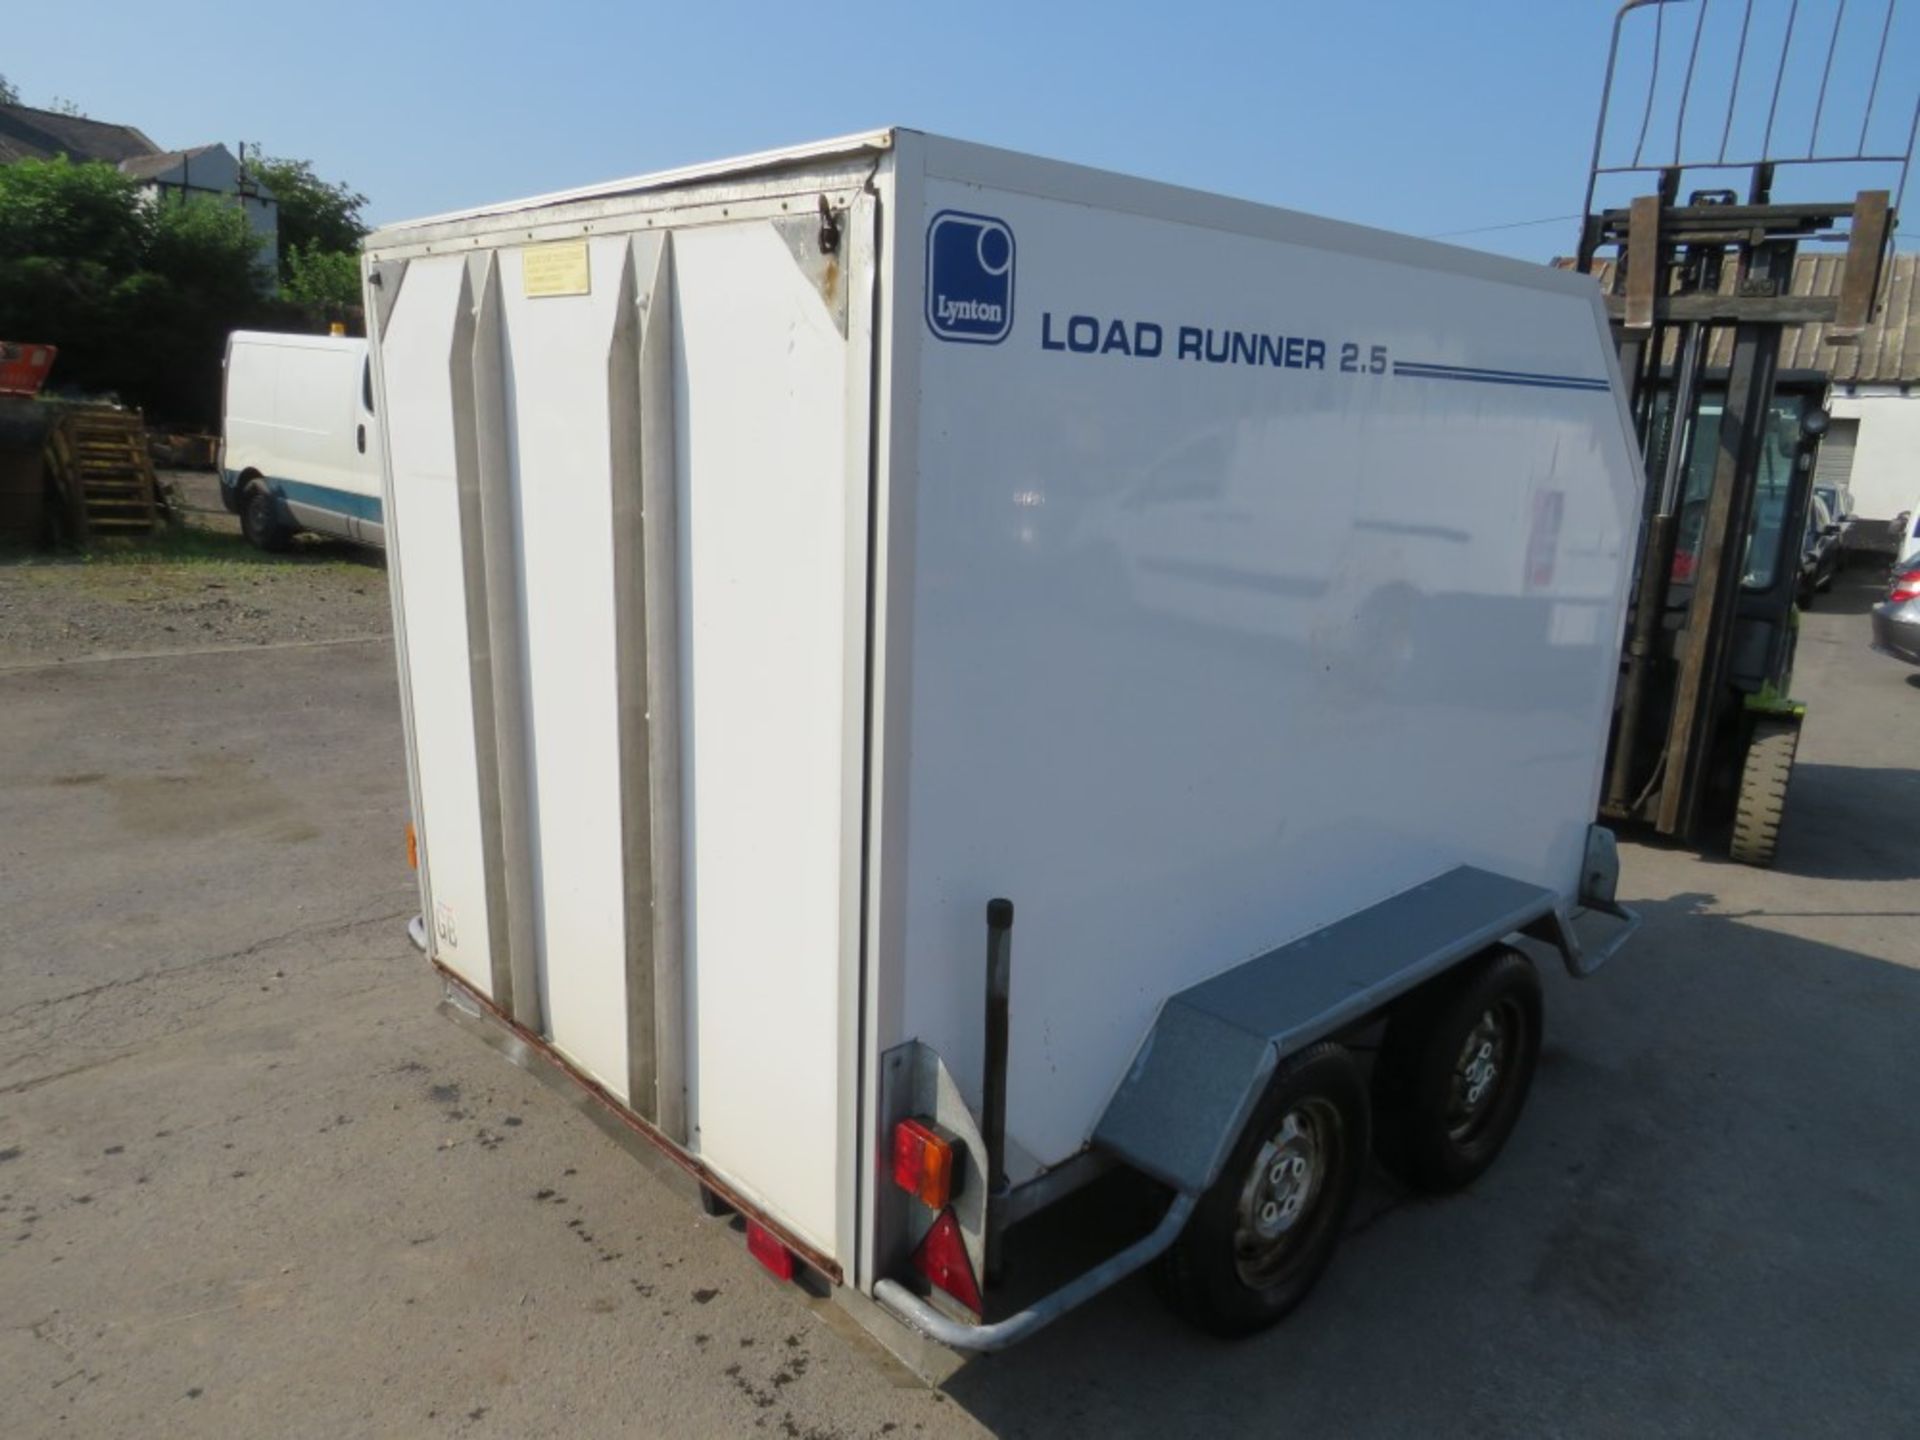 LYNTON LOAD RUNNER 2.5 TOW-A-VAN (DIRECT COUNCIL) [+ VAT] - Image 2 of 3